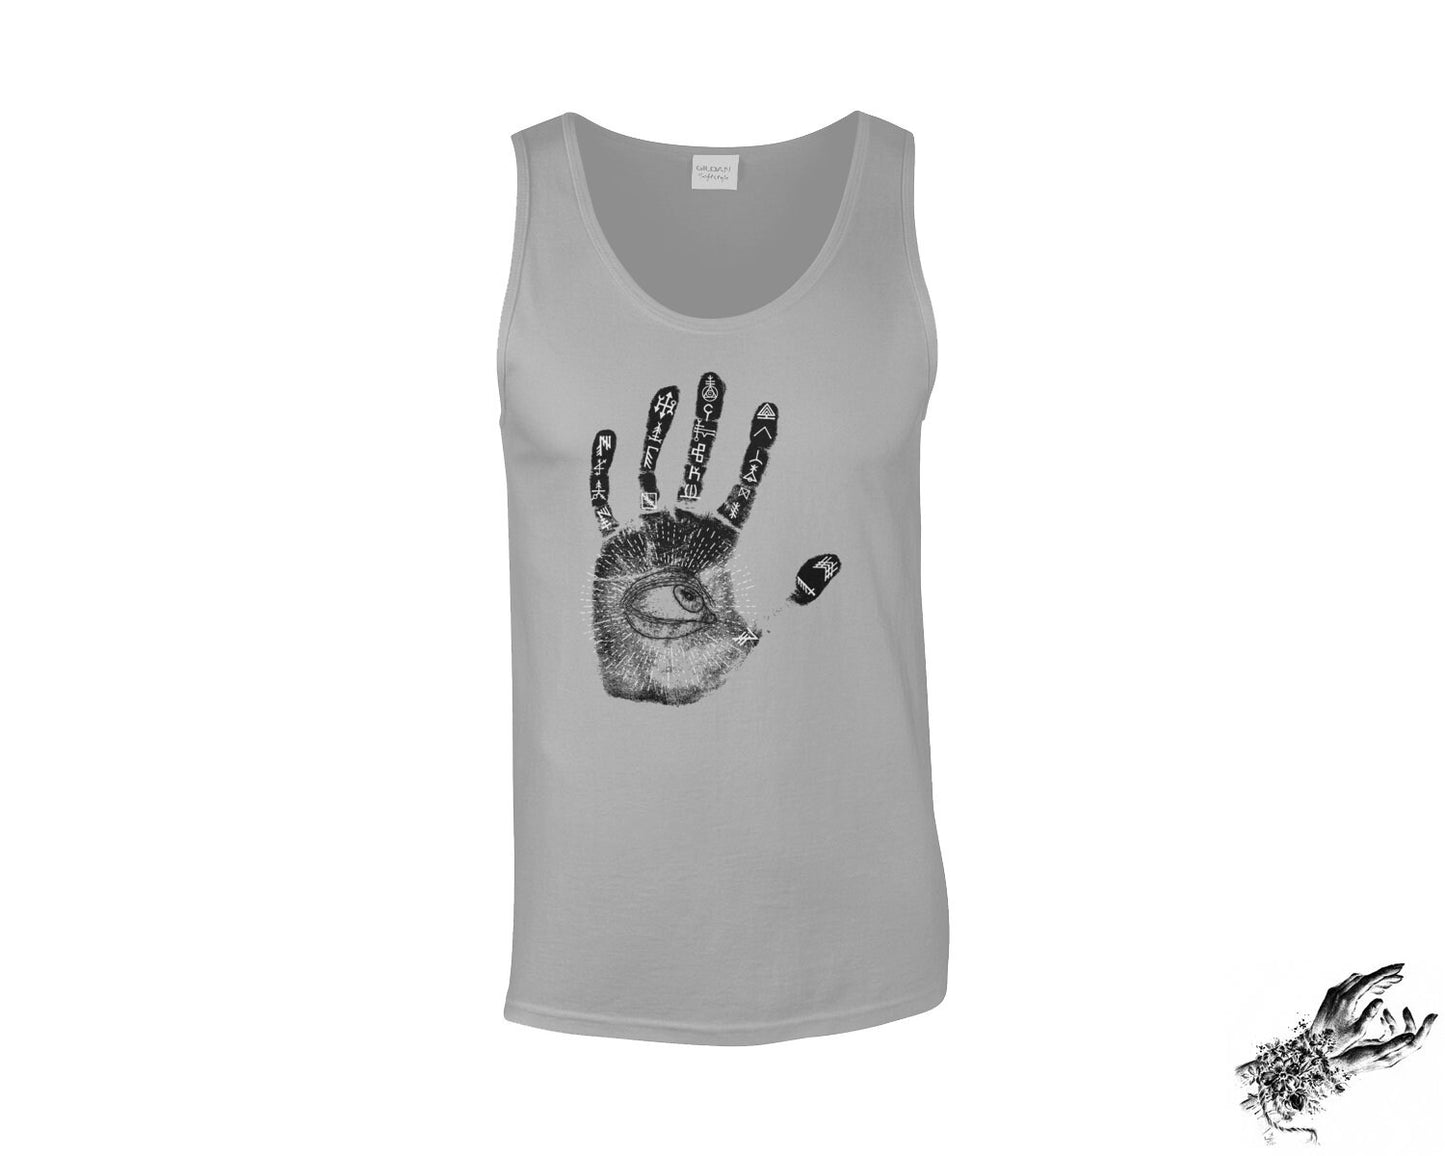 Grey and Black Occult Hand Print Unisex Tank Top